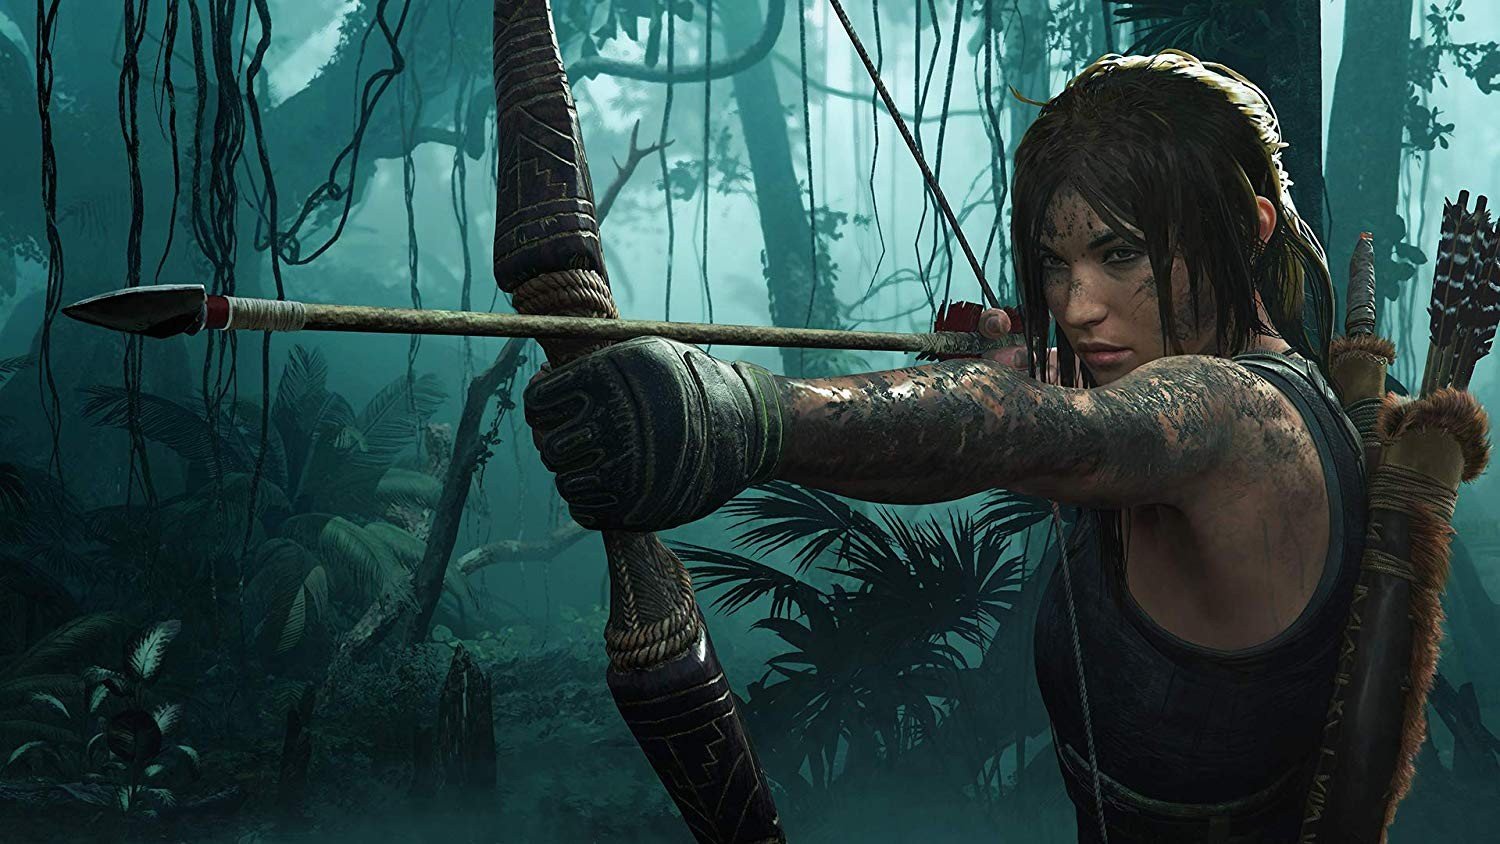 Shadow of the Tomb Raider: Definitive Edition,Shadow of the Tomb Raider,xone, xbox one, ps4, playstation 4, us, north america, eu, europe, release date, gameplay, features, price, square enix, eidos montreal